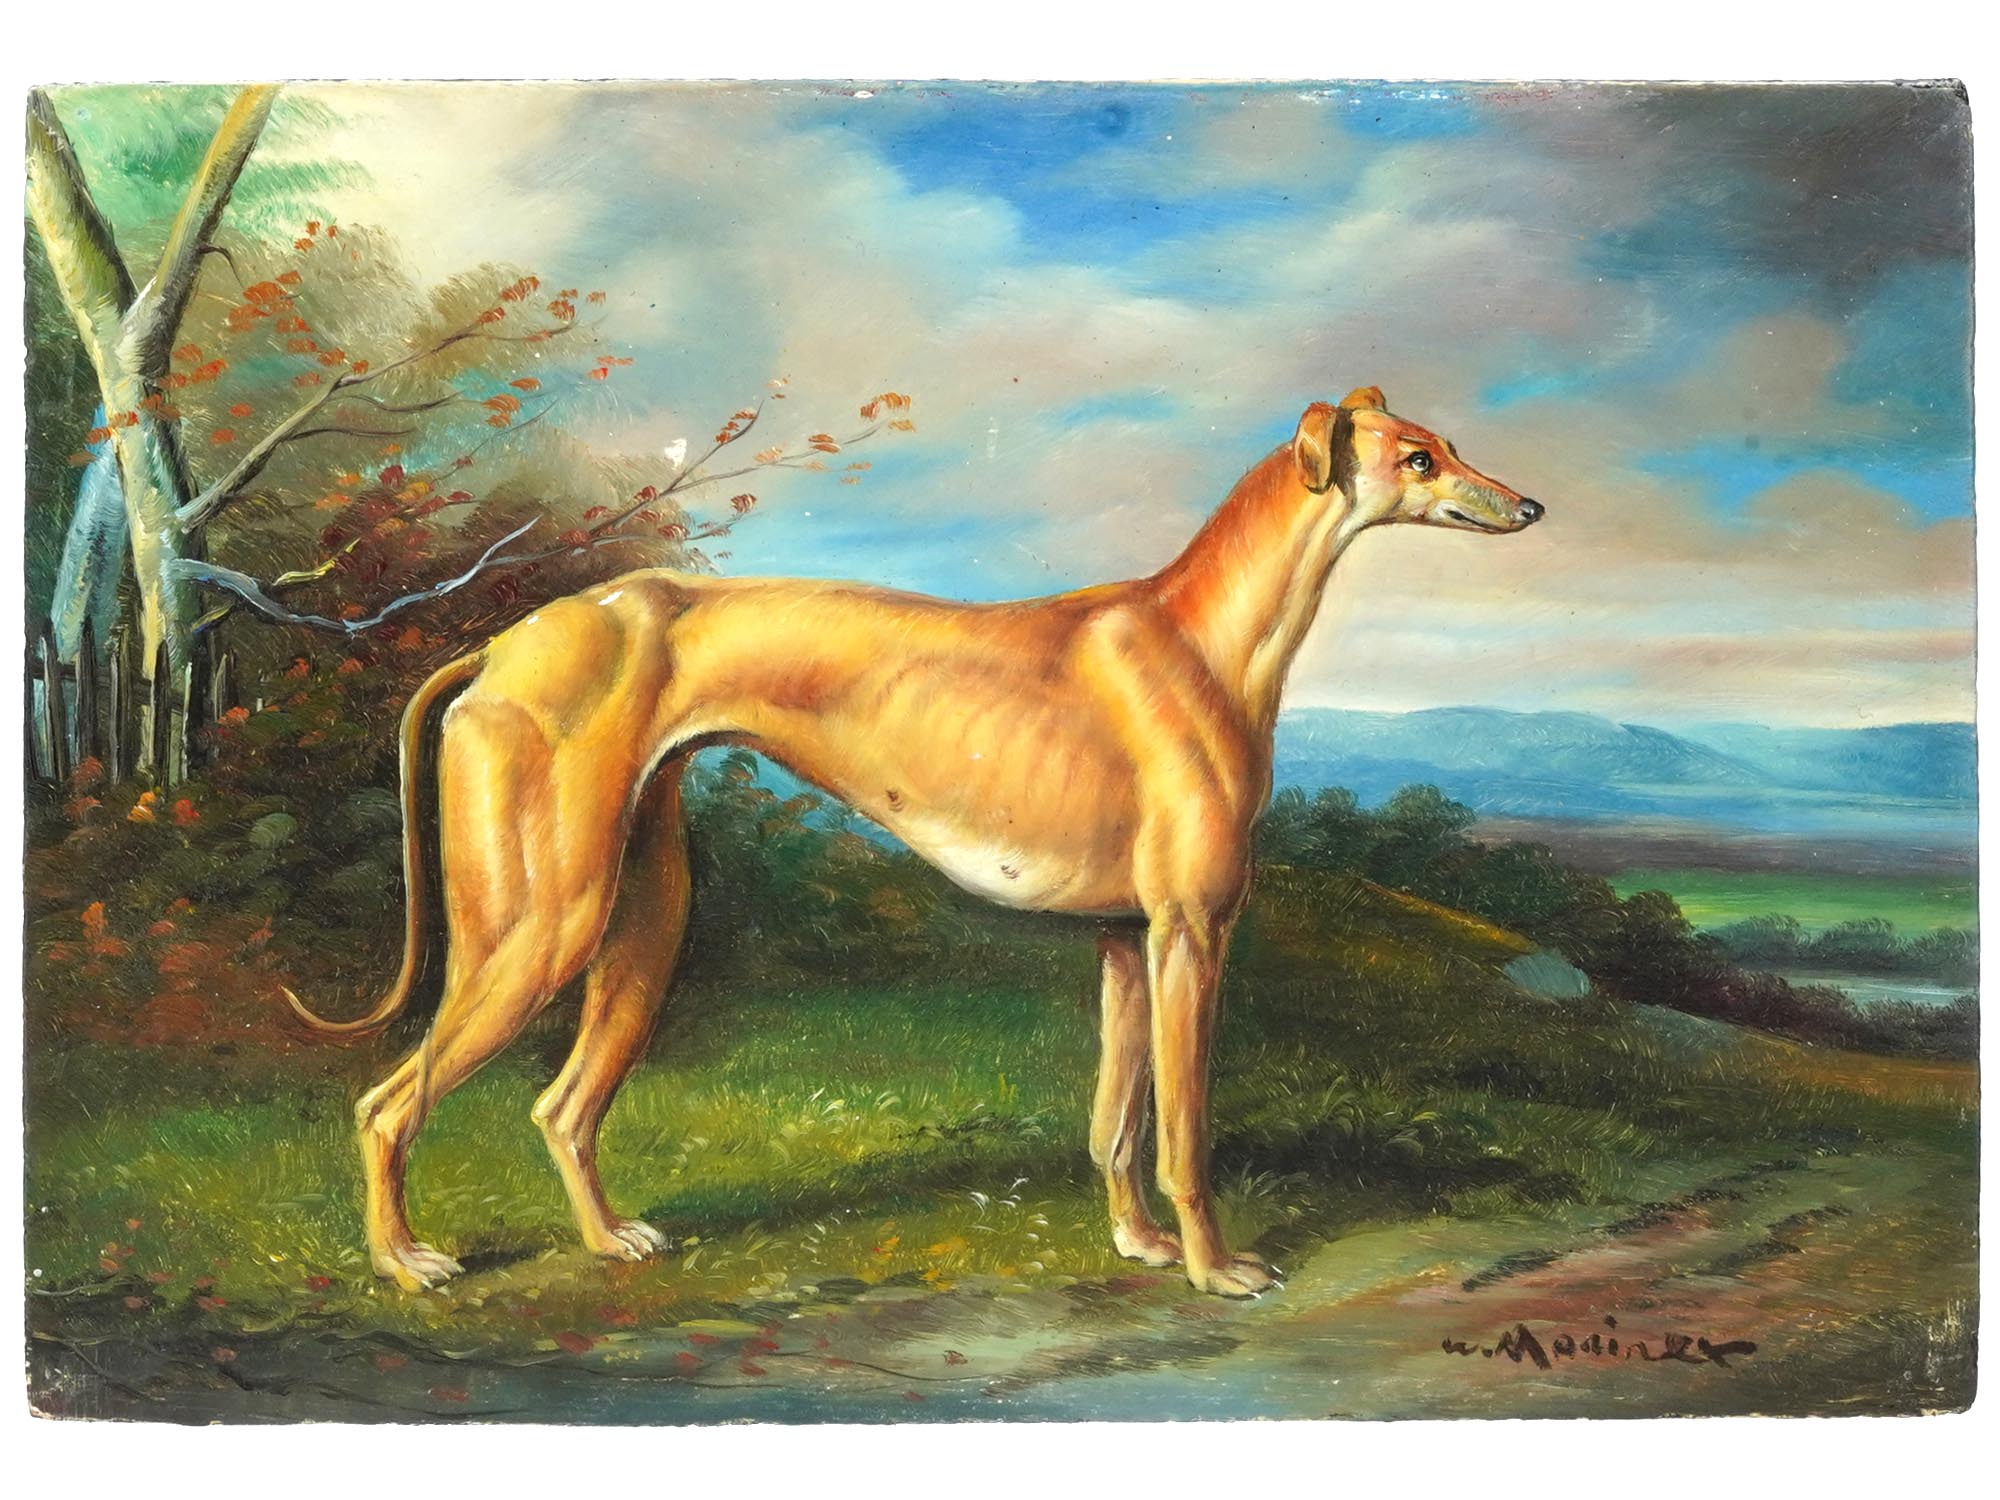 AMERICAN OIL PAINTING OF A DOG BY WILLIAM MONINET PIC-1